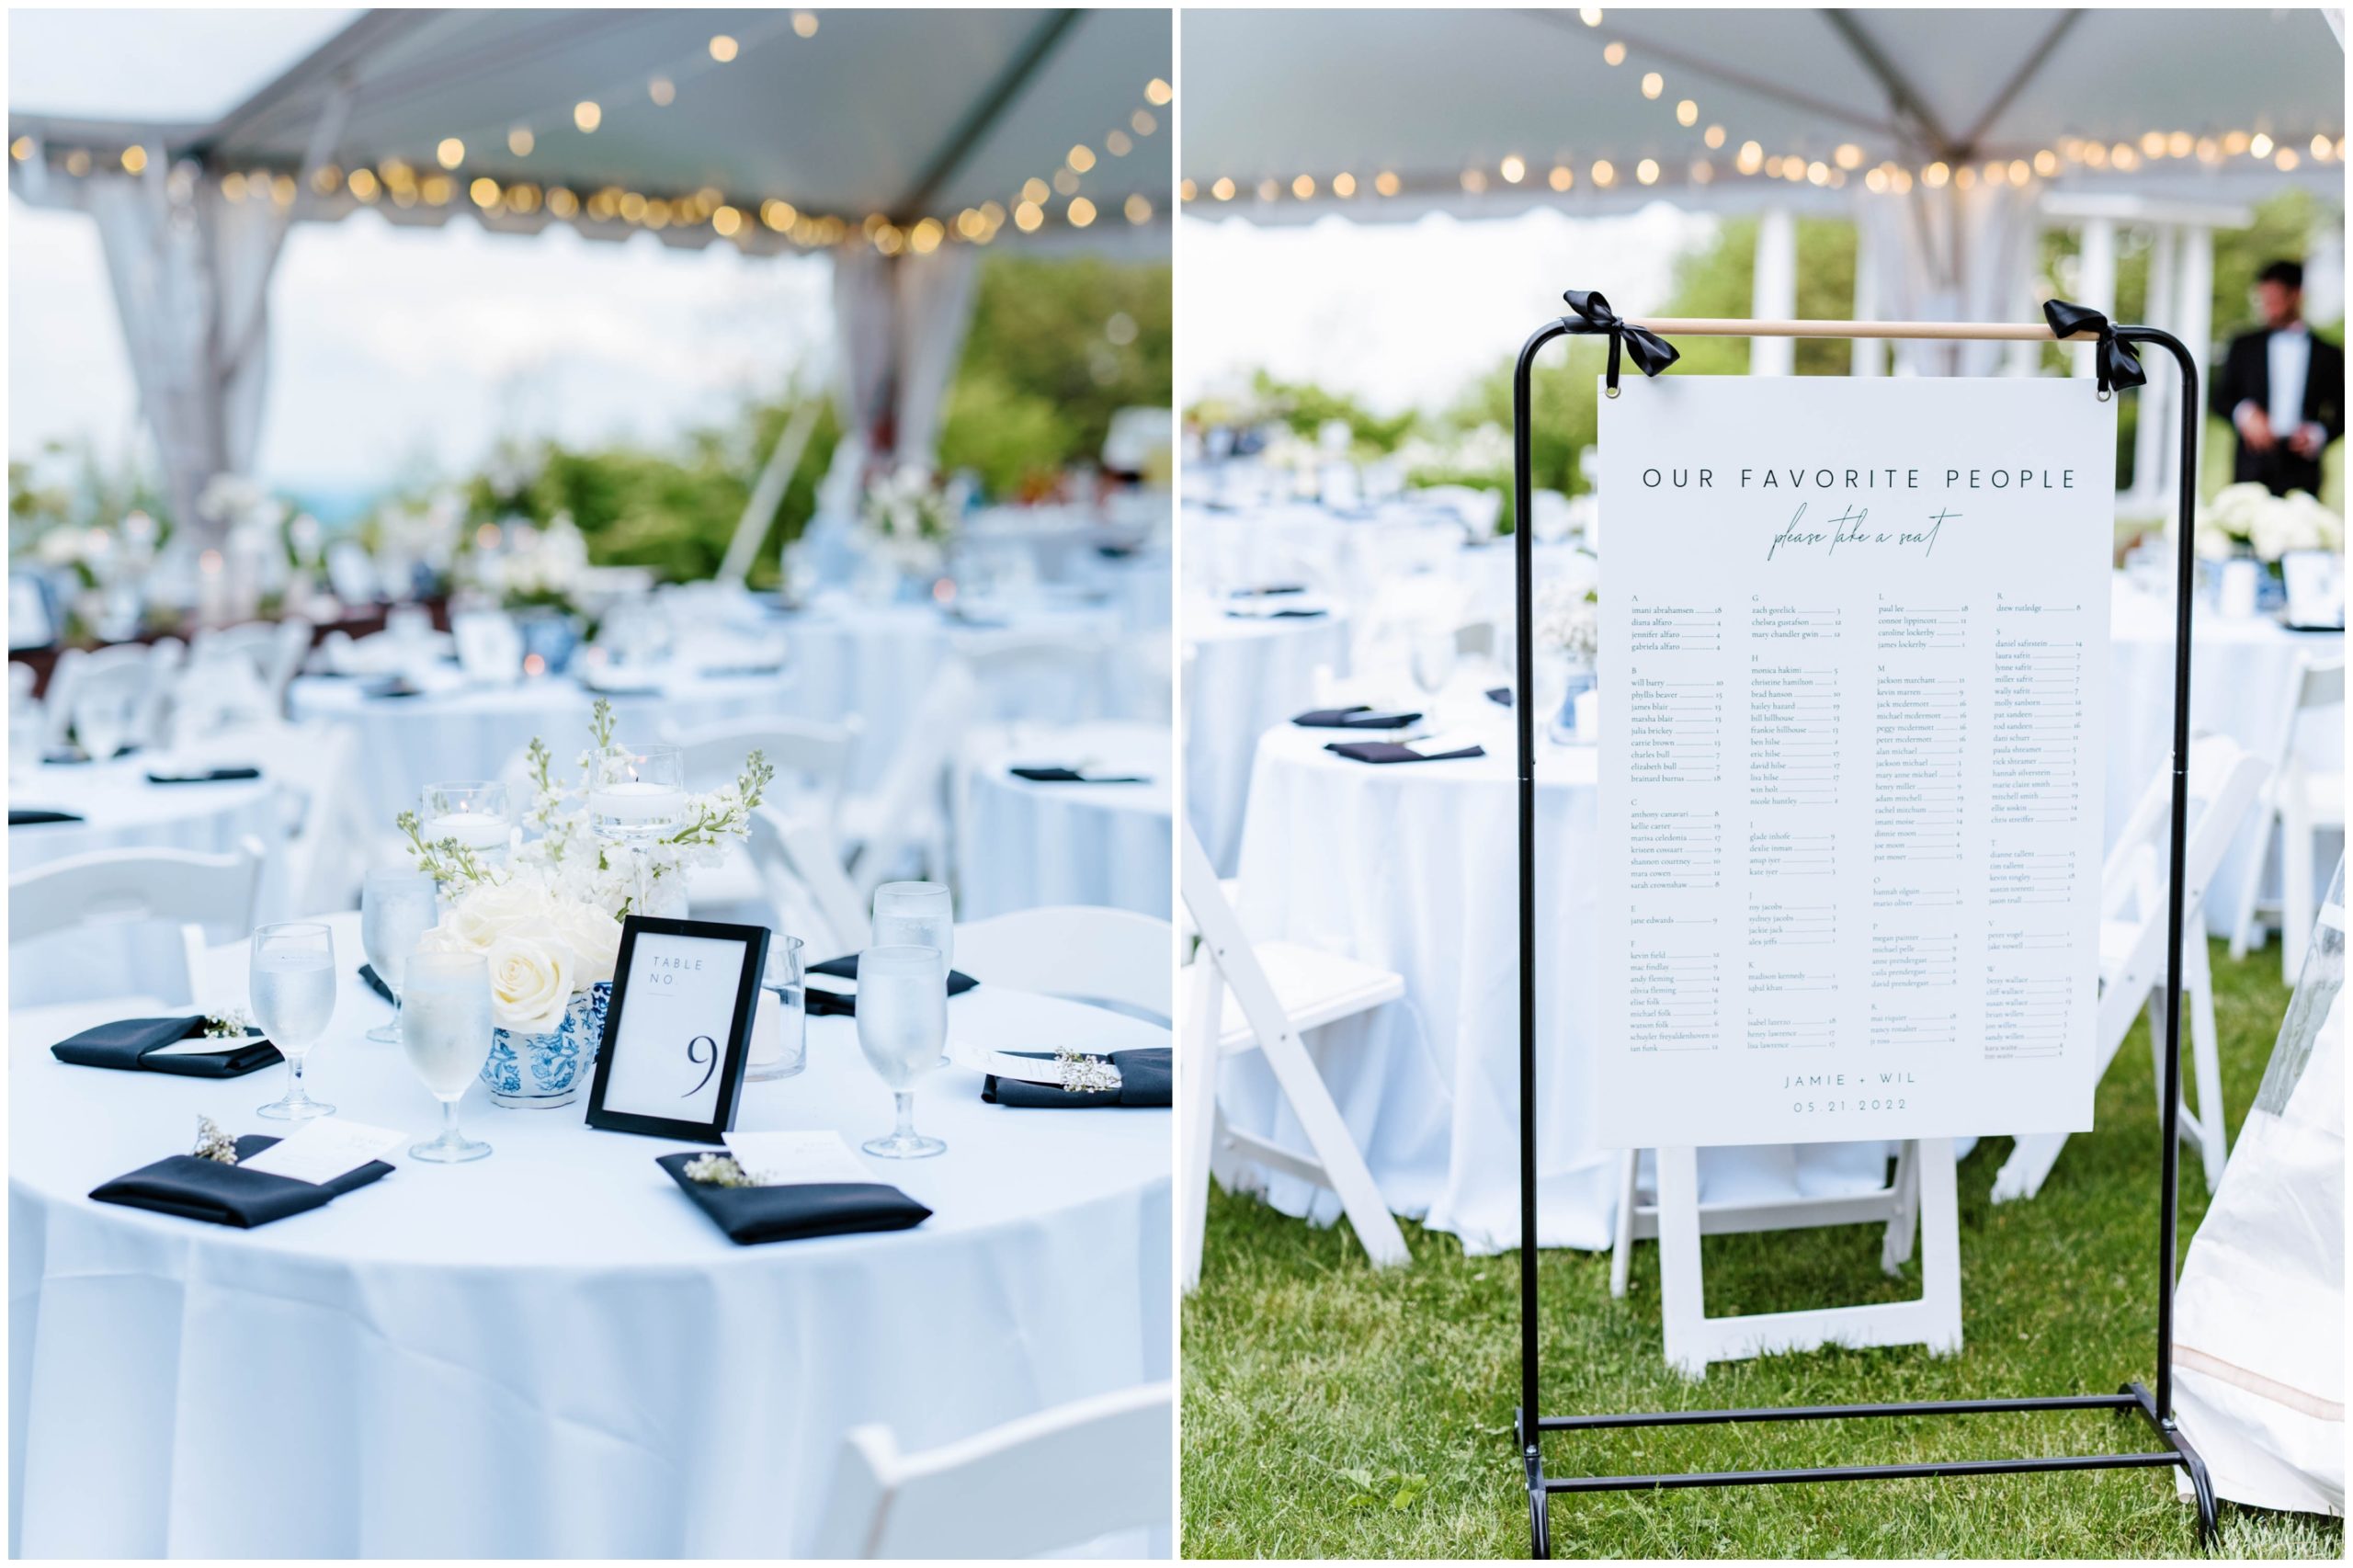 Hanging baby's breath arrangements, white table linens, and blue-and-white pottery centerpieces for a spring tented wedding reception